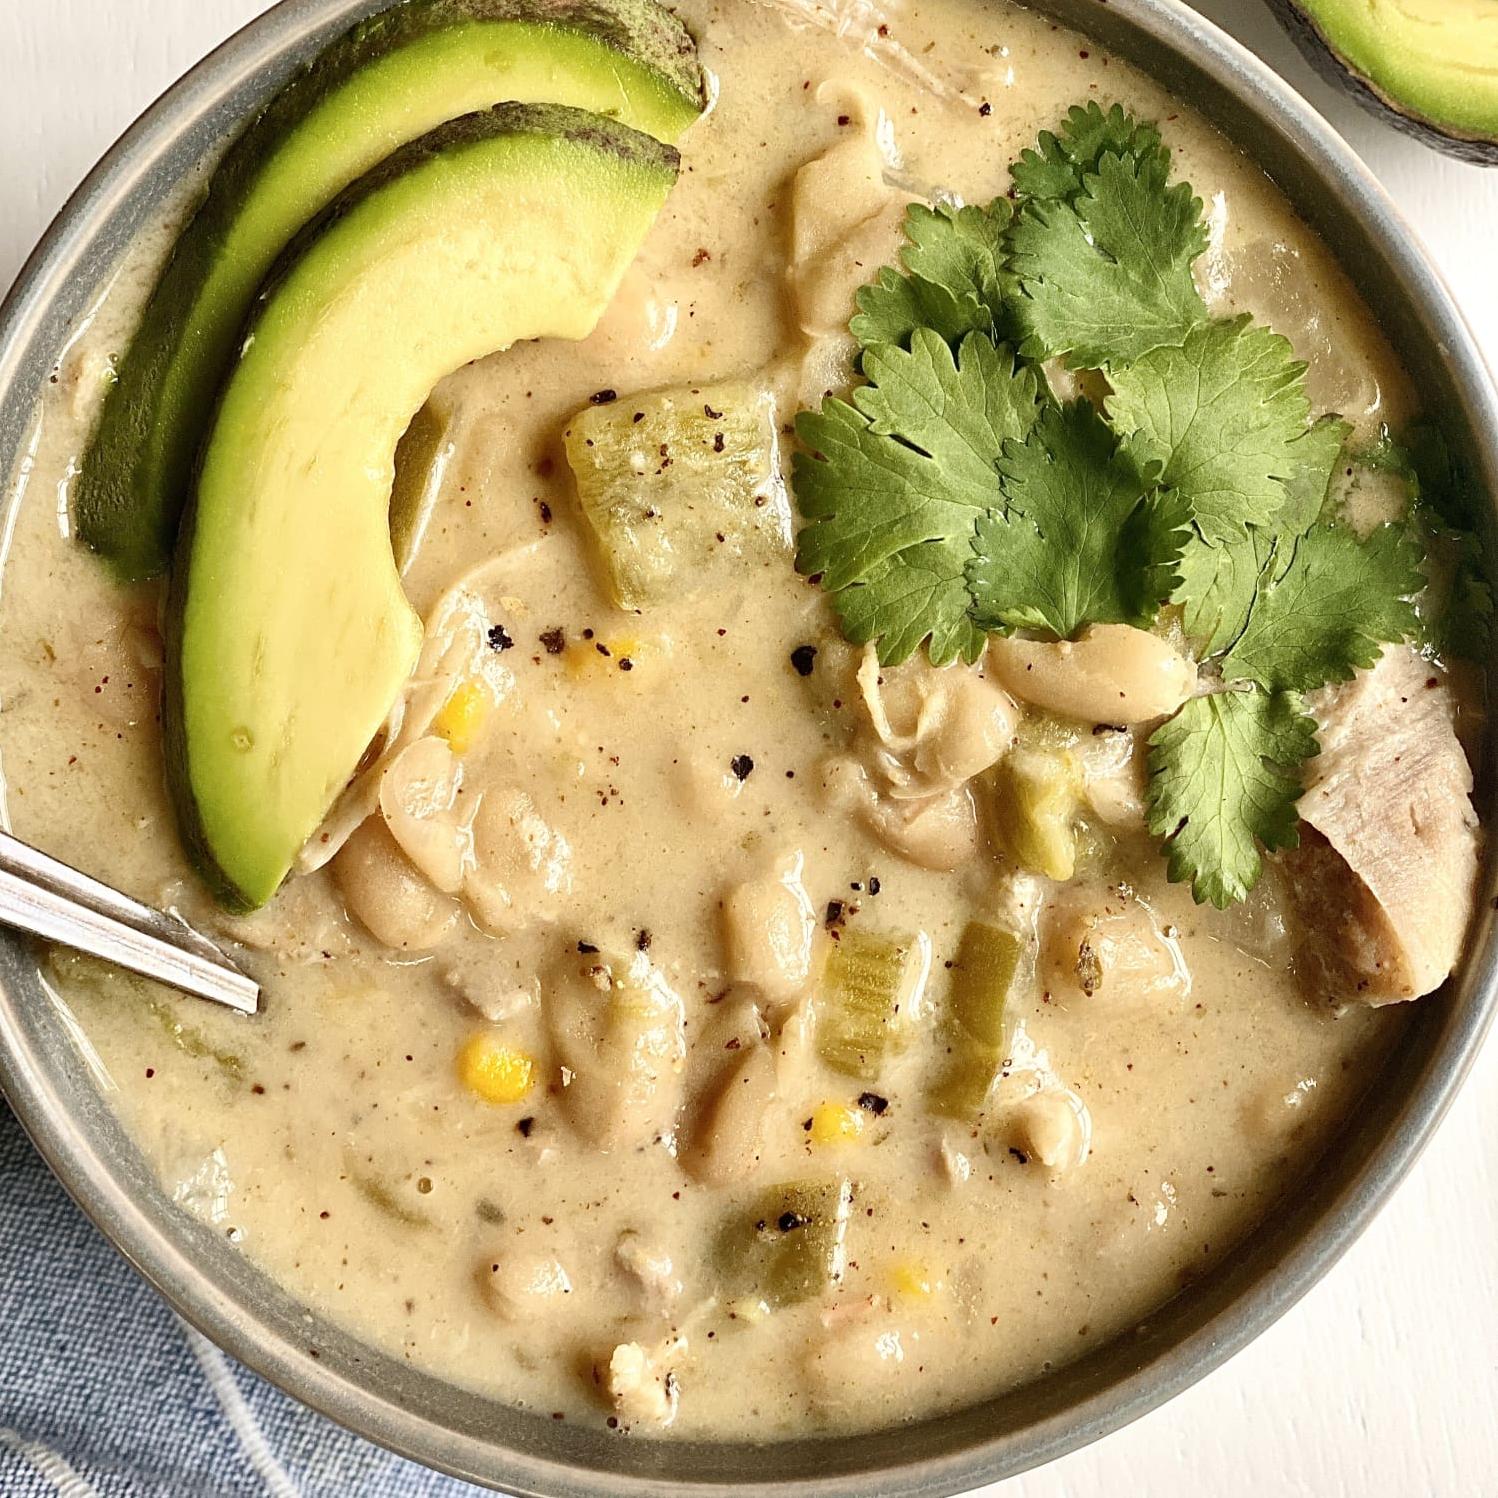  Cozy up with a bowl of this flavorful Instant Pot White Chicken Chili!